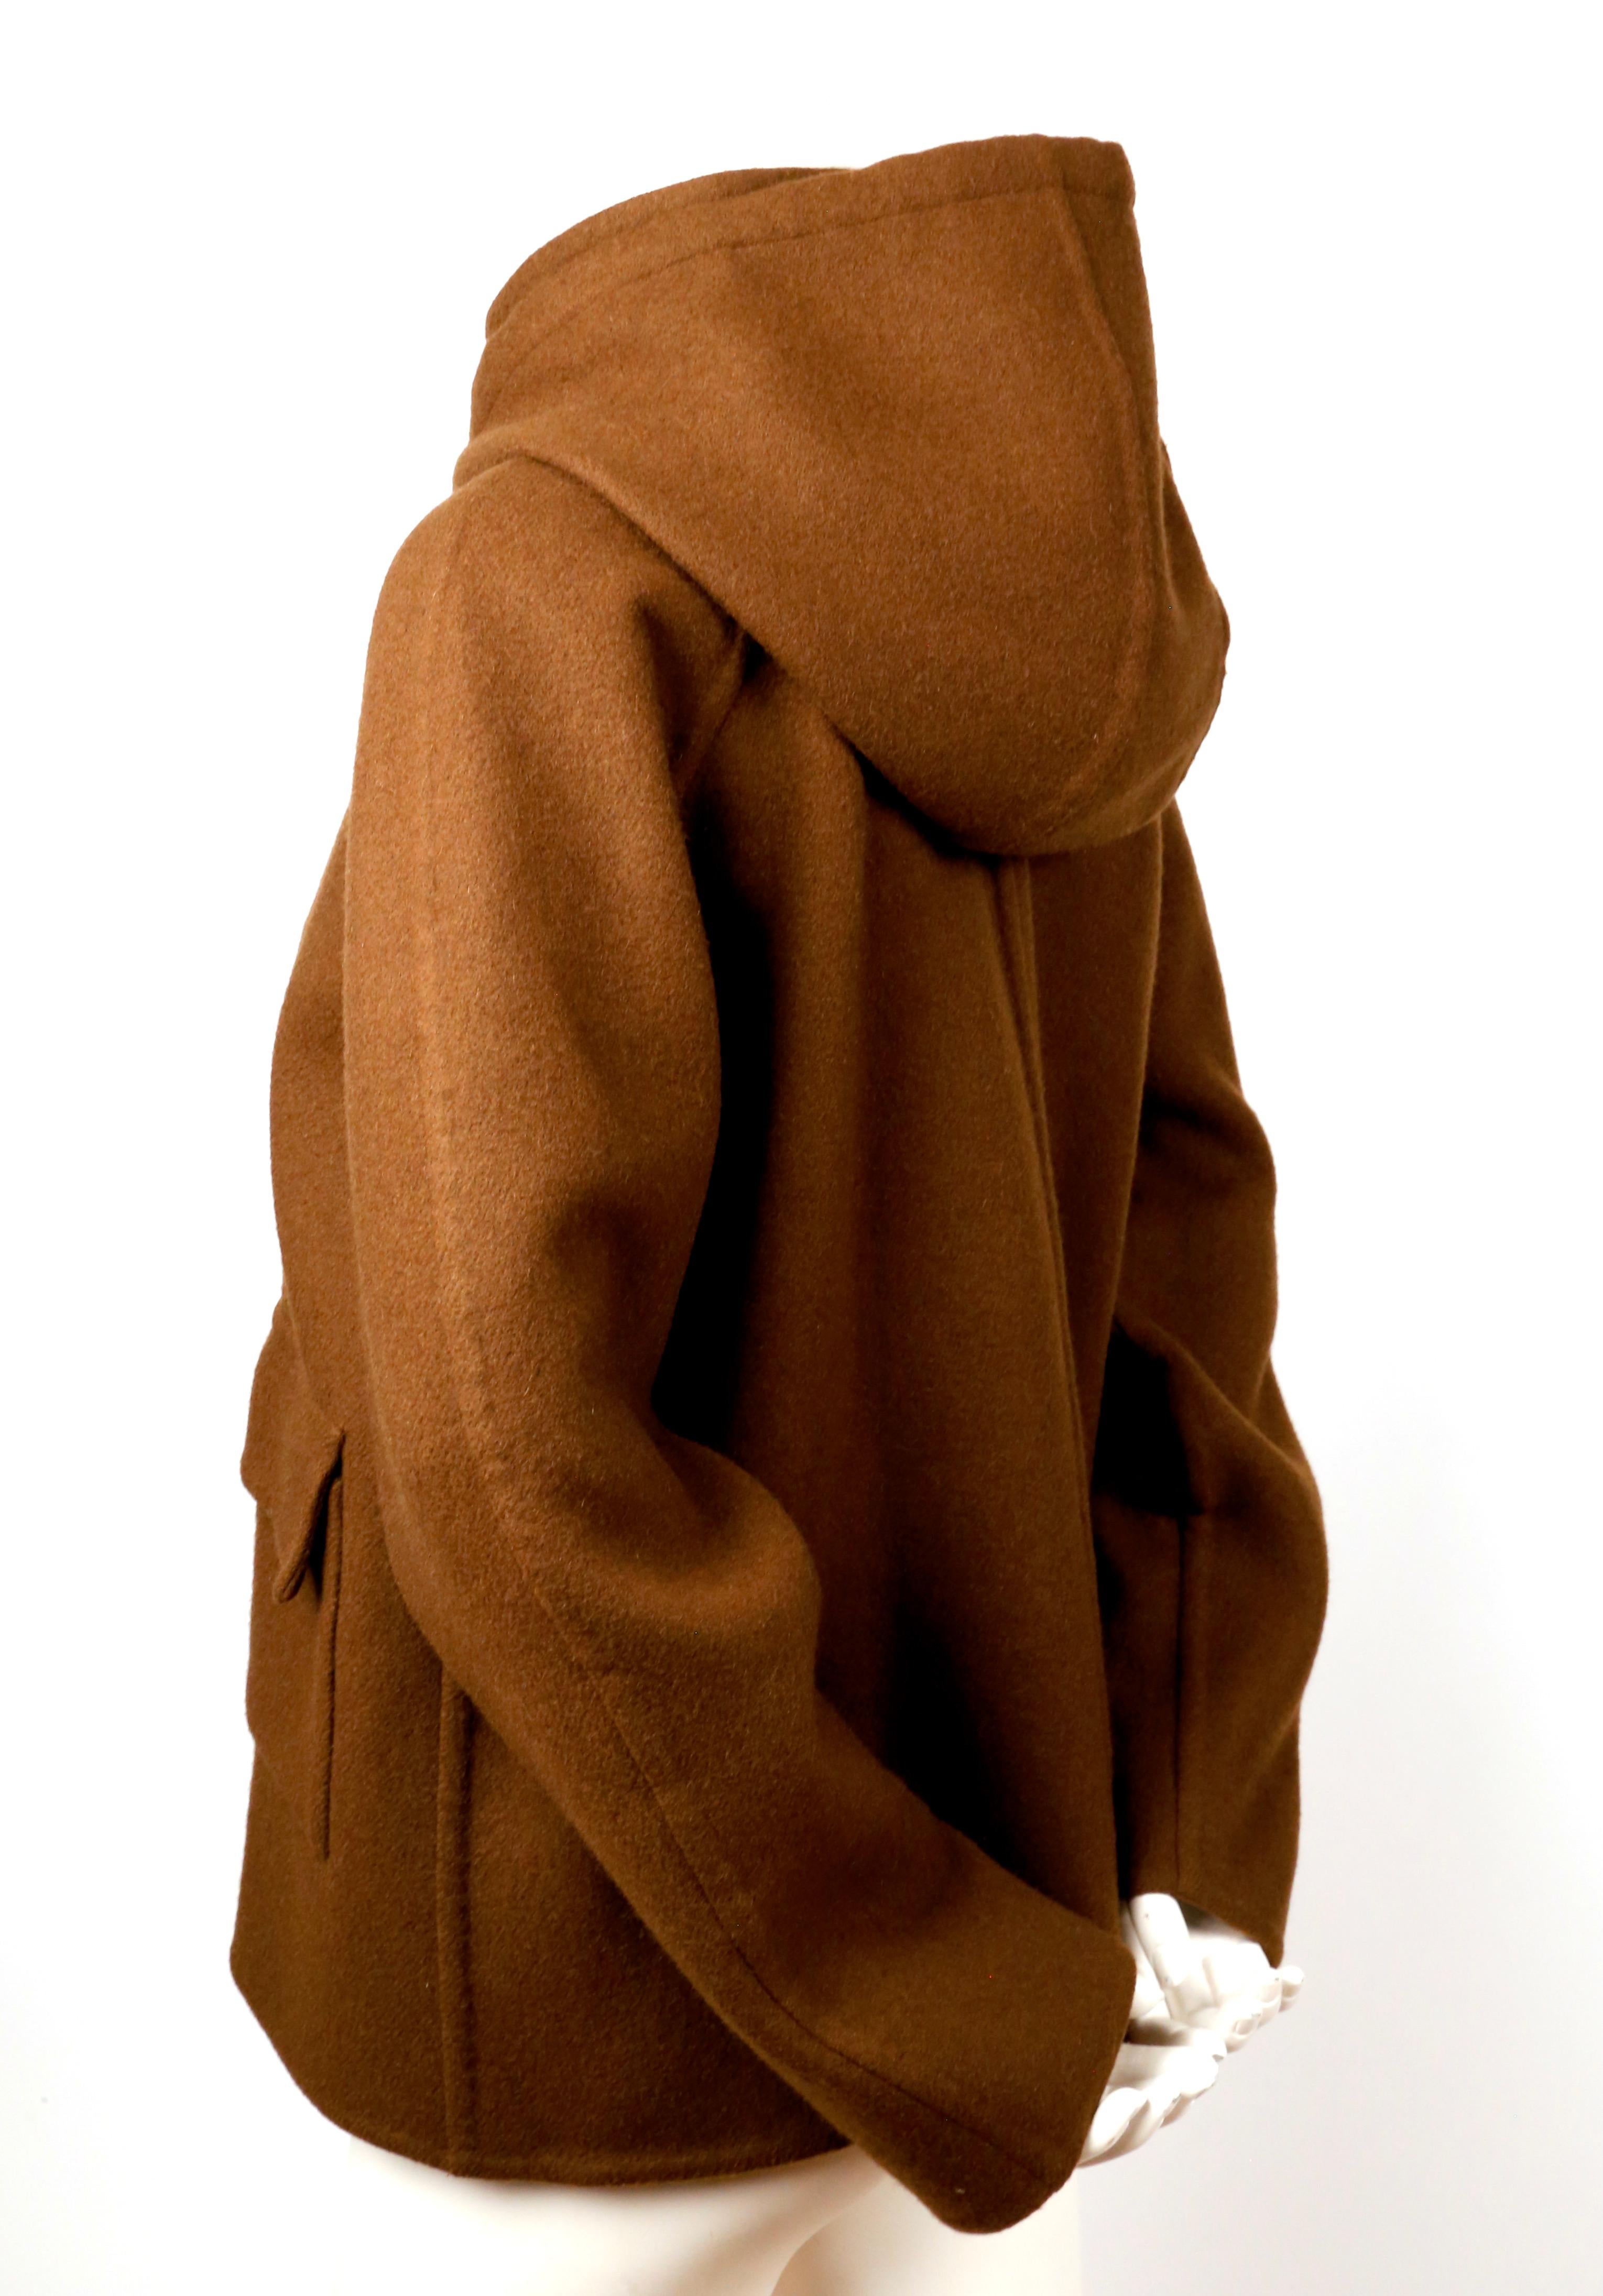 Brown 2014 CELINE by PHOEBE PHILO hooded cashmere jacket with patch pockets